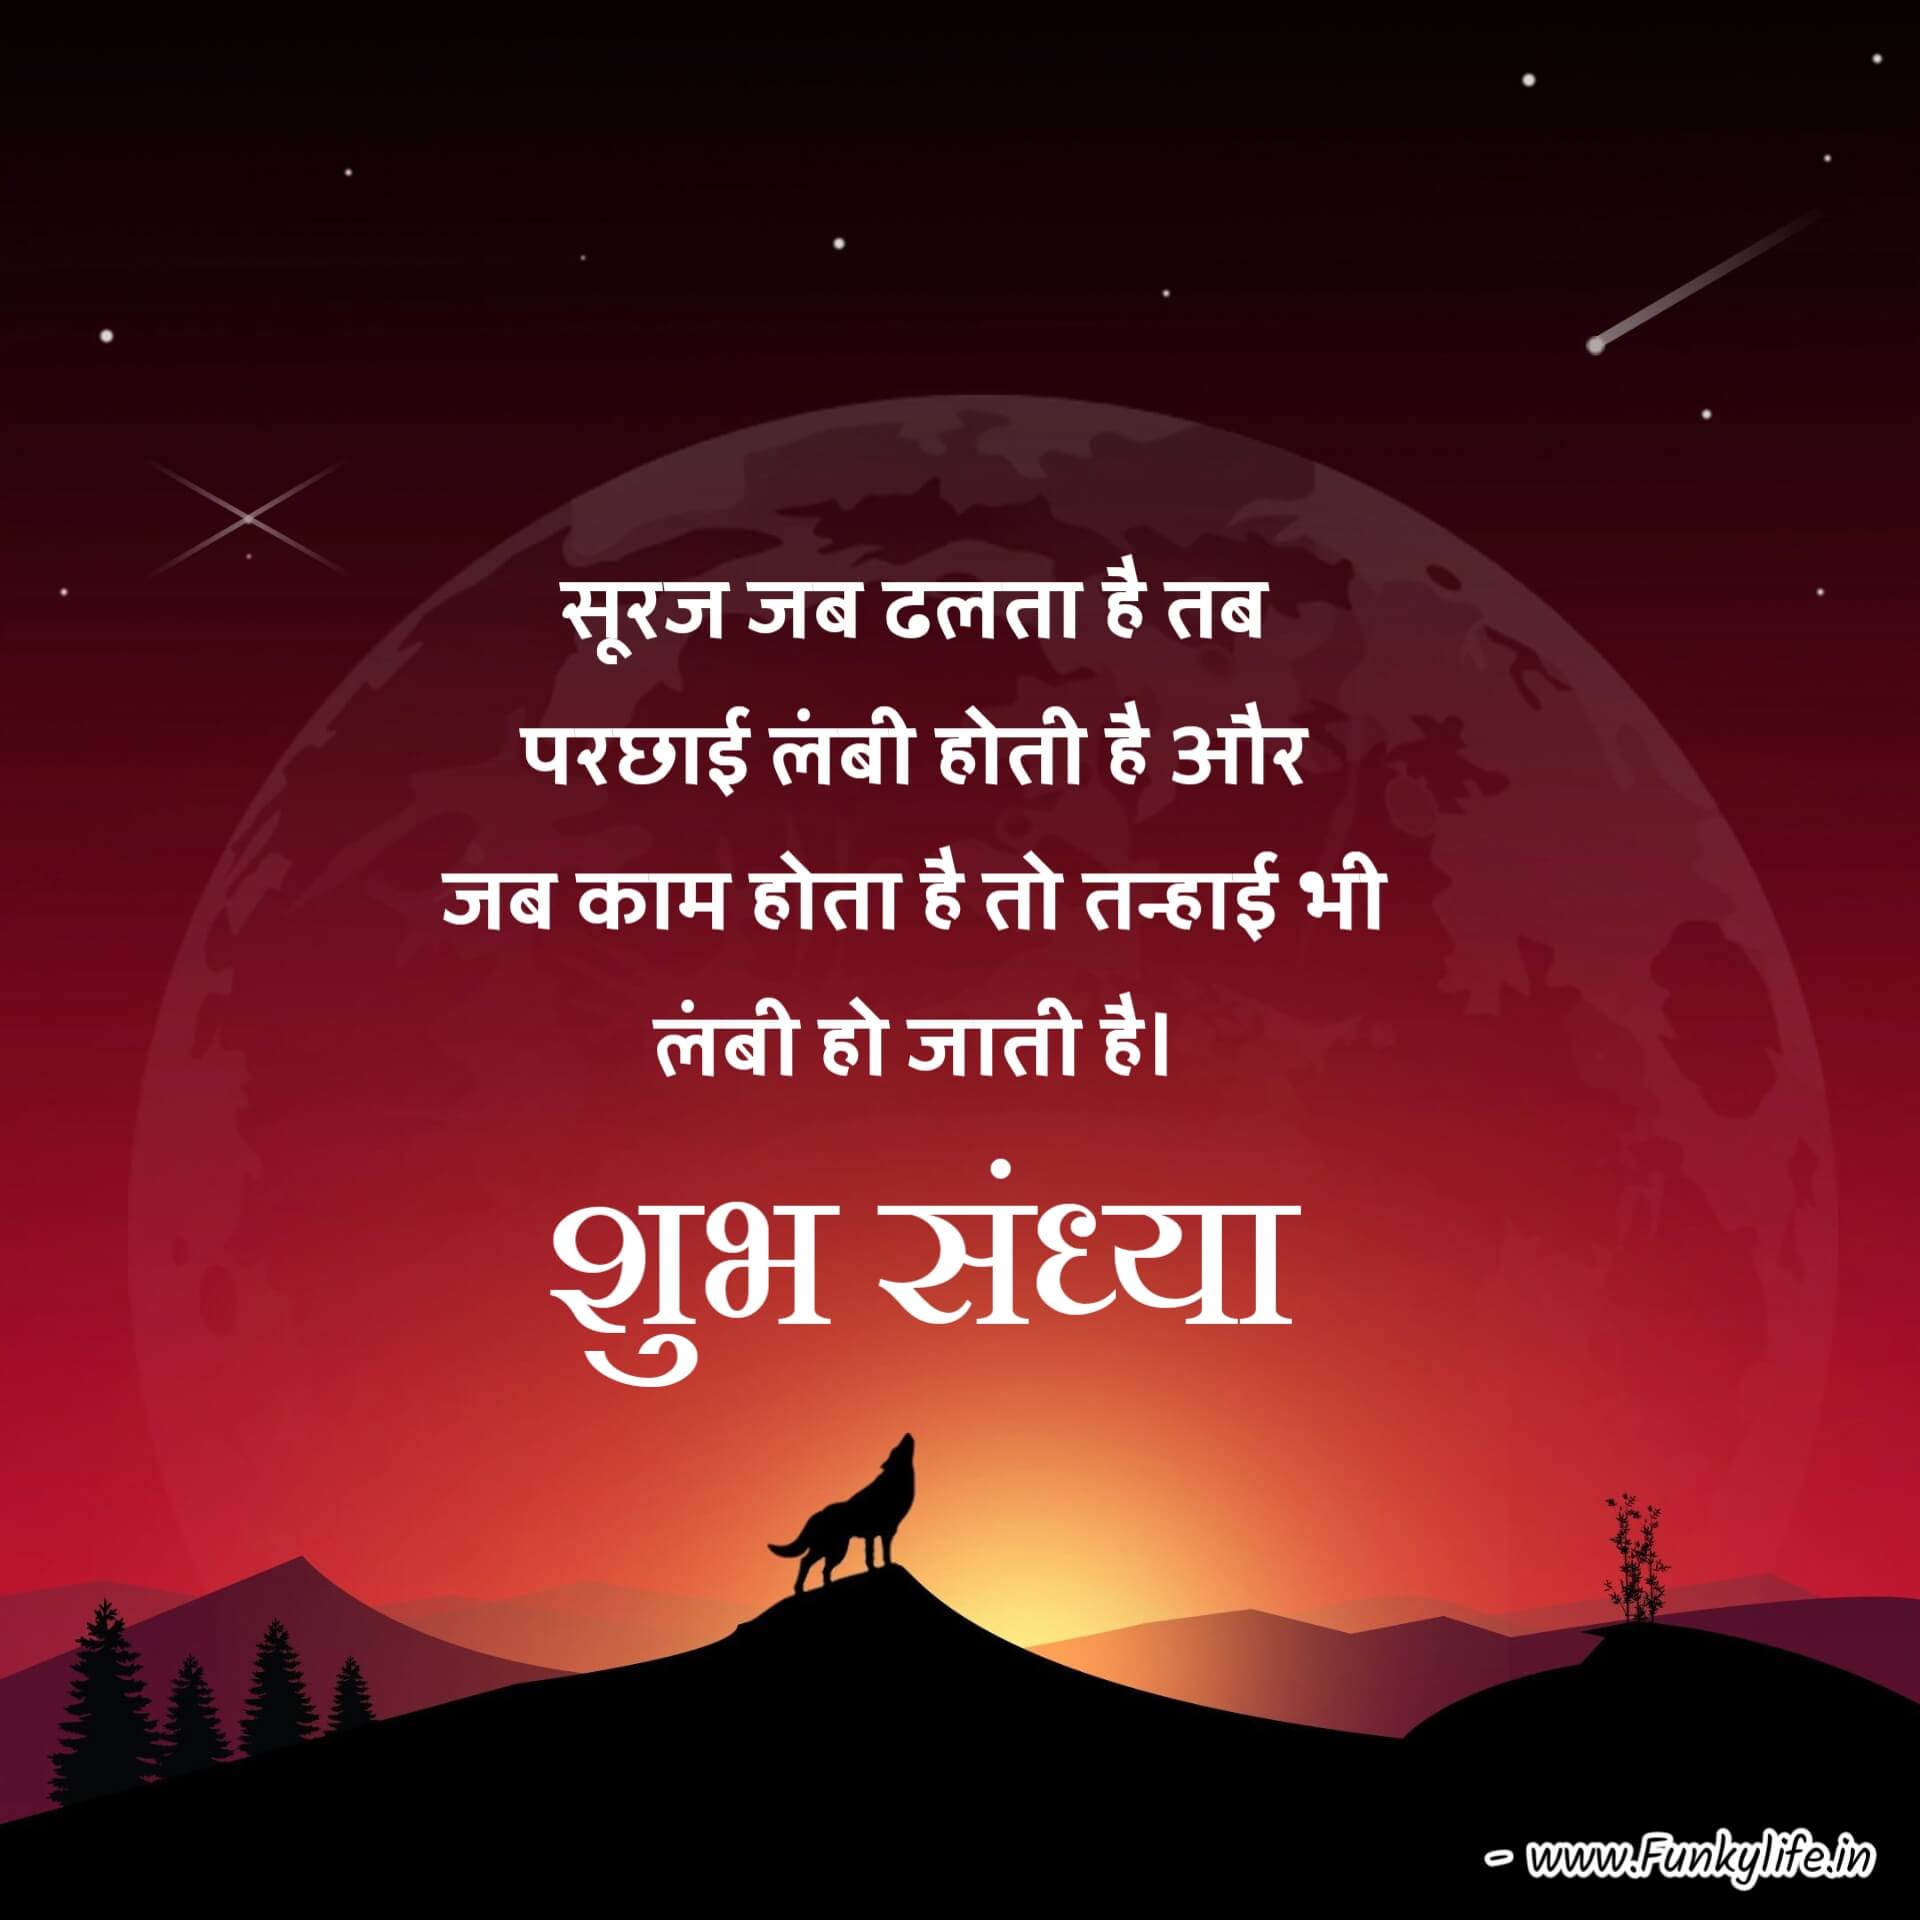 Good Evening Images in Hindi